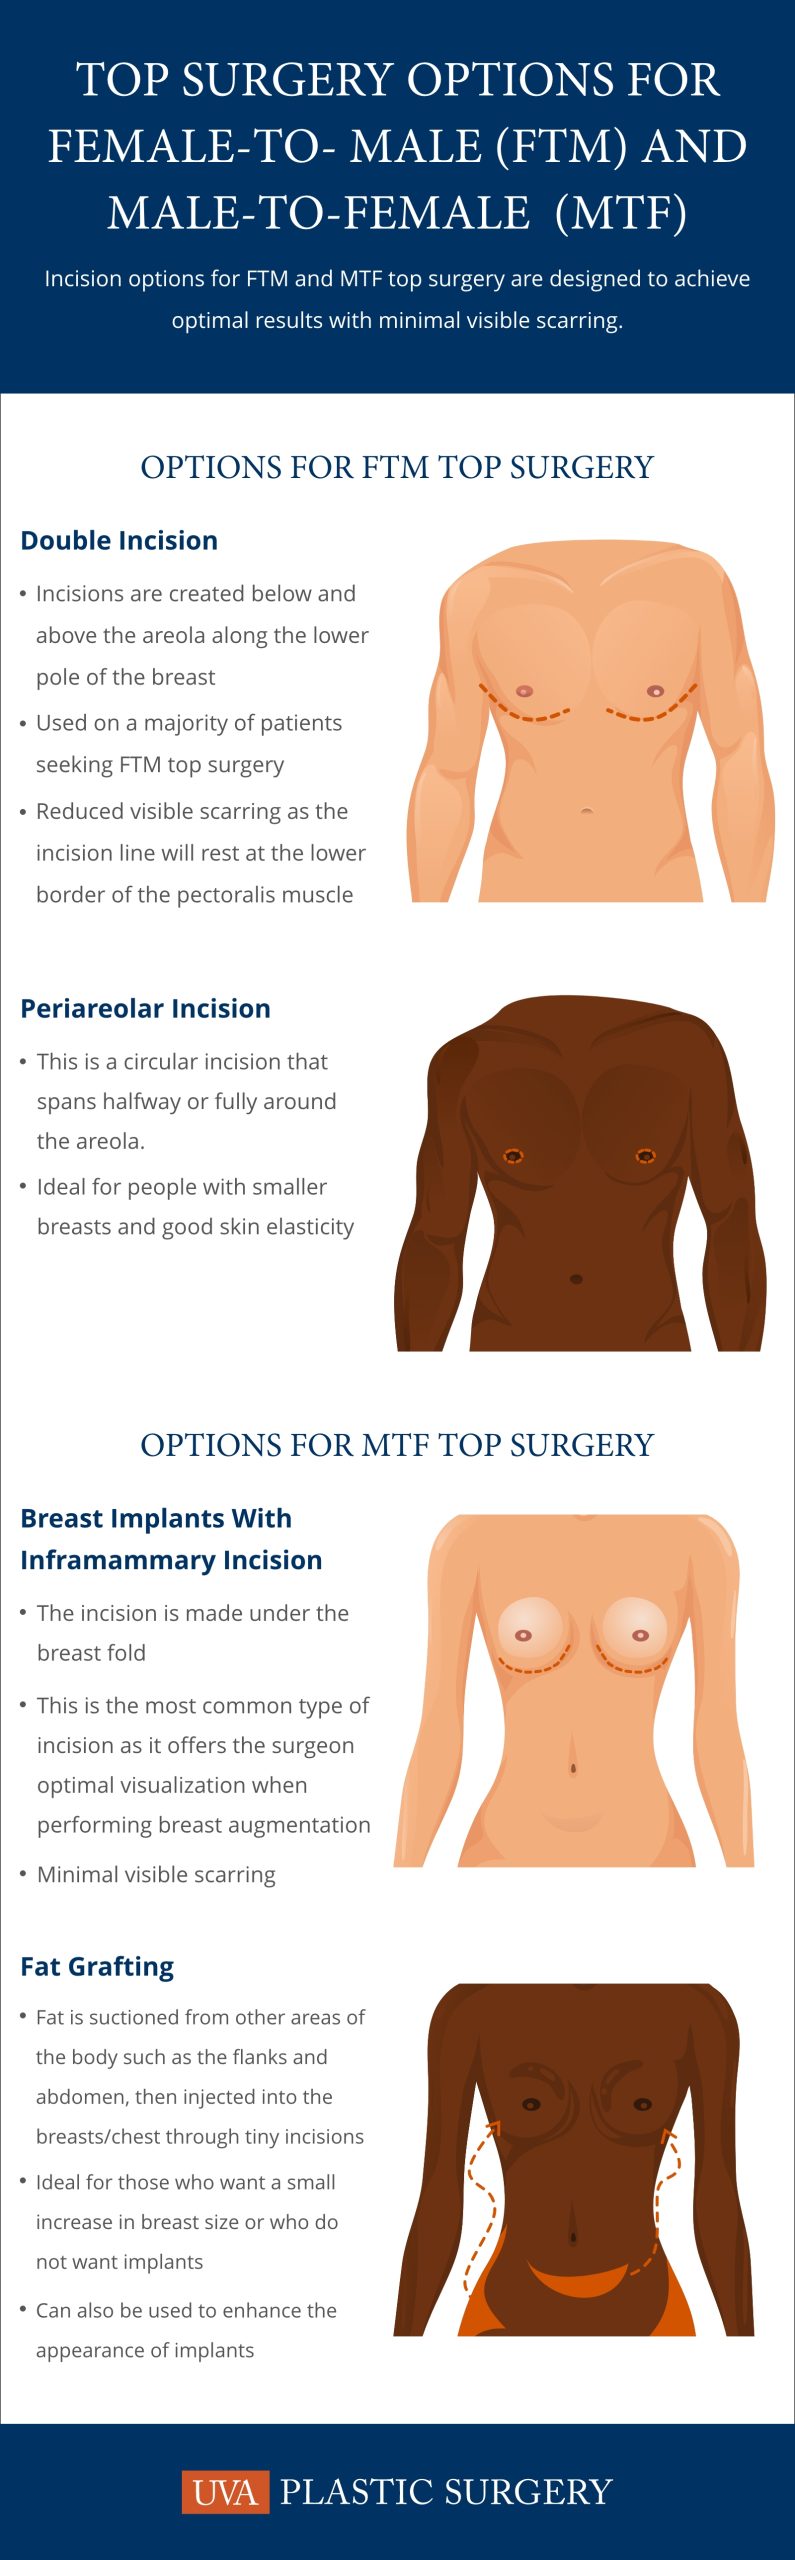 Illustration of incision lines on FTM and MTF top surgery.